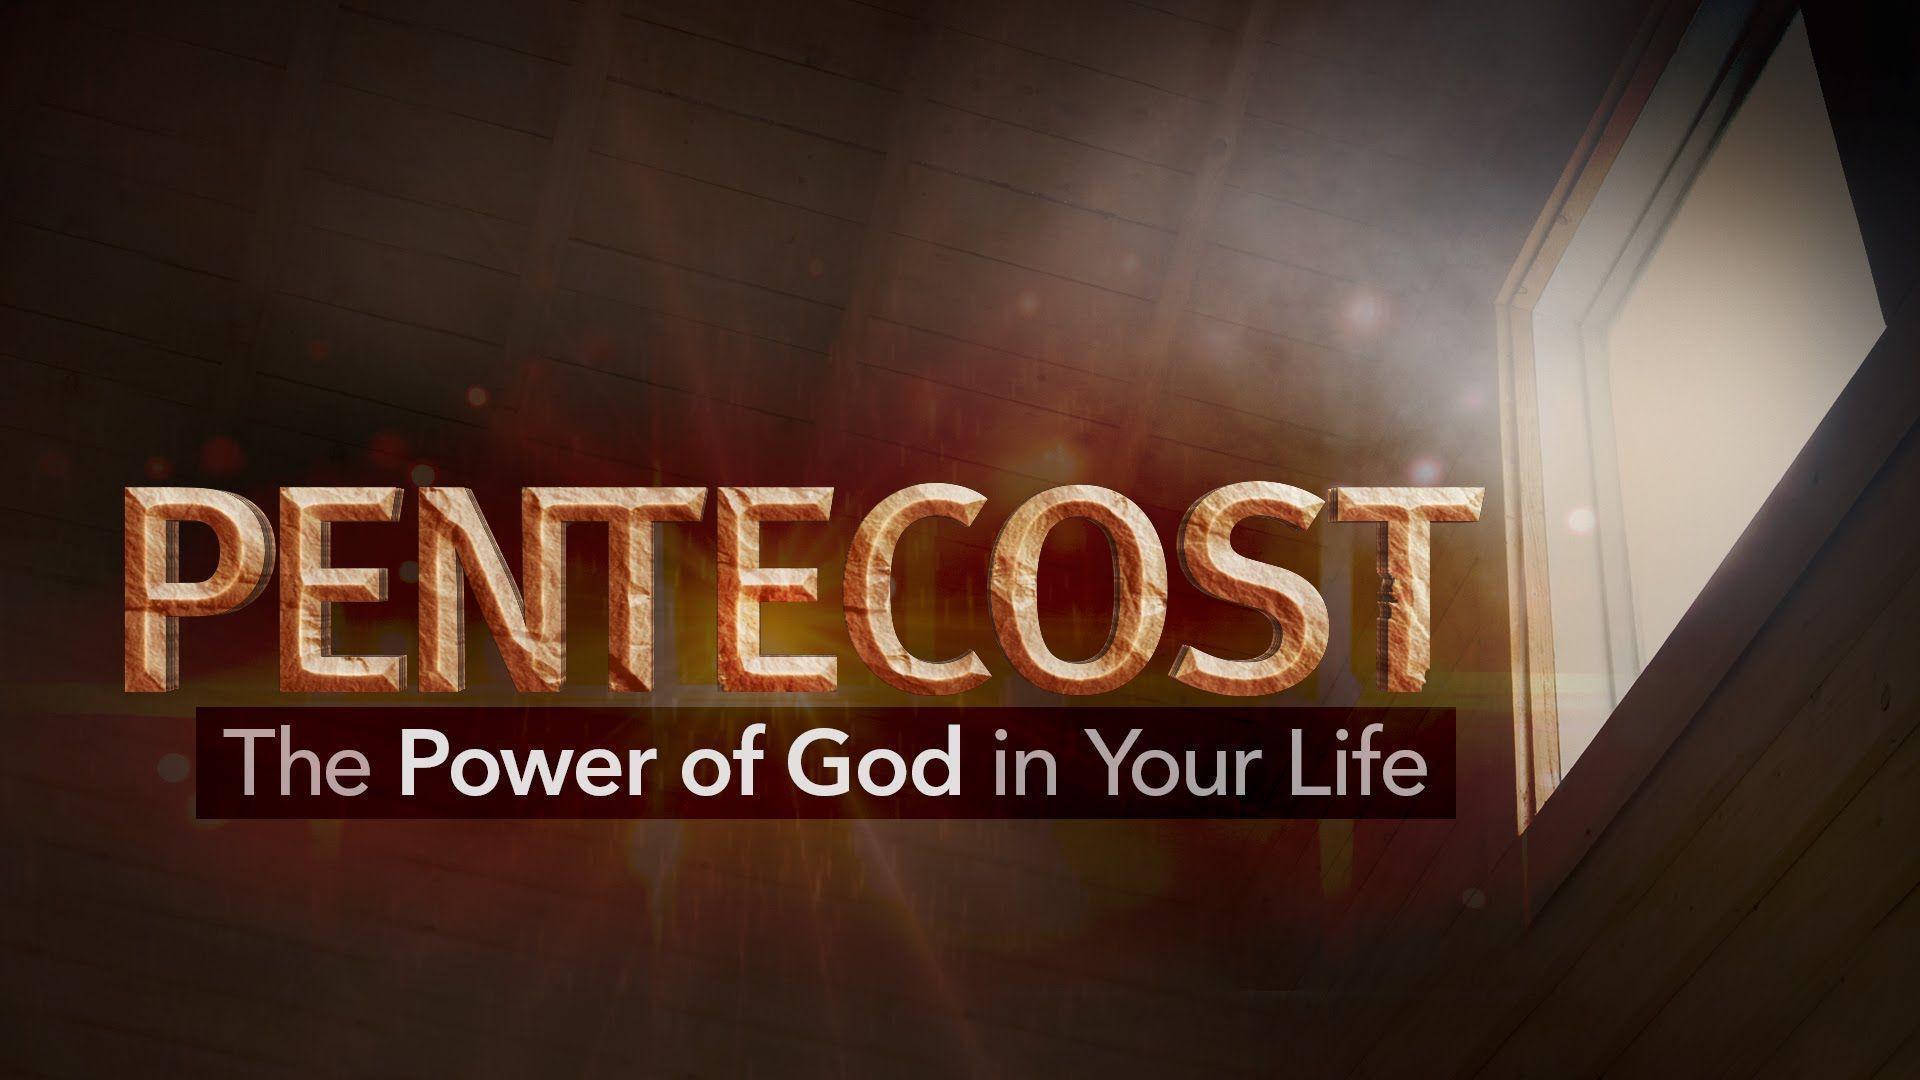 Beyond Today - Pentecost: The Power of God in Your Life